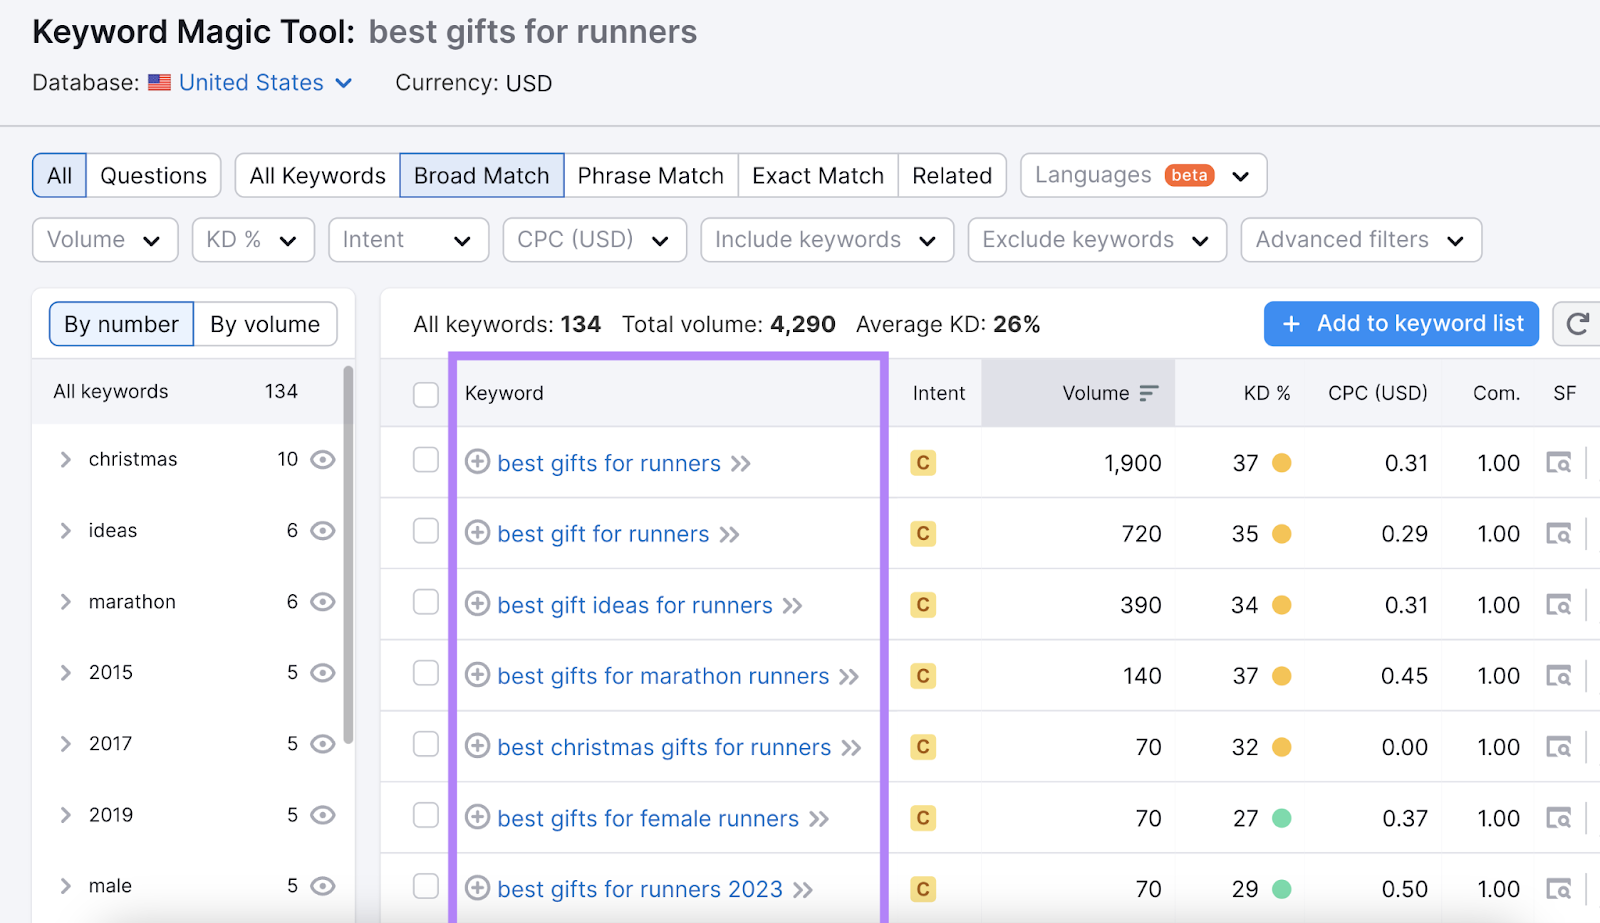 “best gifts for trail runners,” “best gifts for marathon runners,” “best gifts for new runners" and other results with their metrics